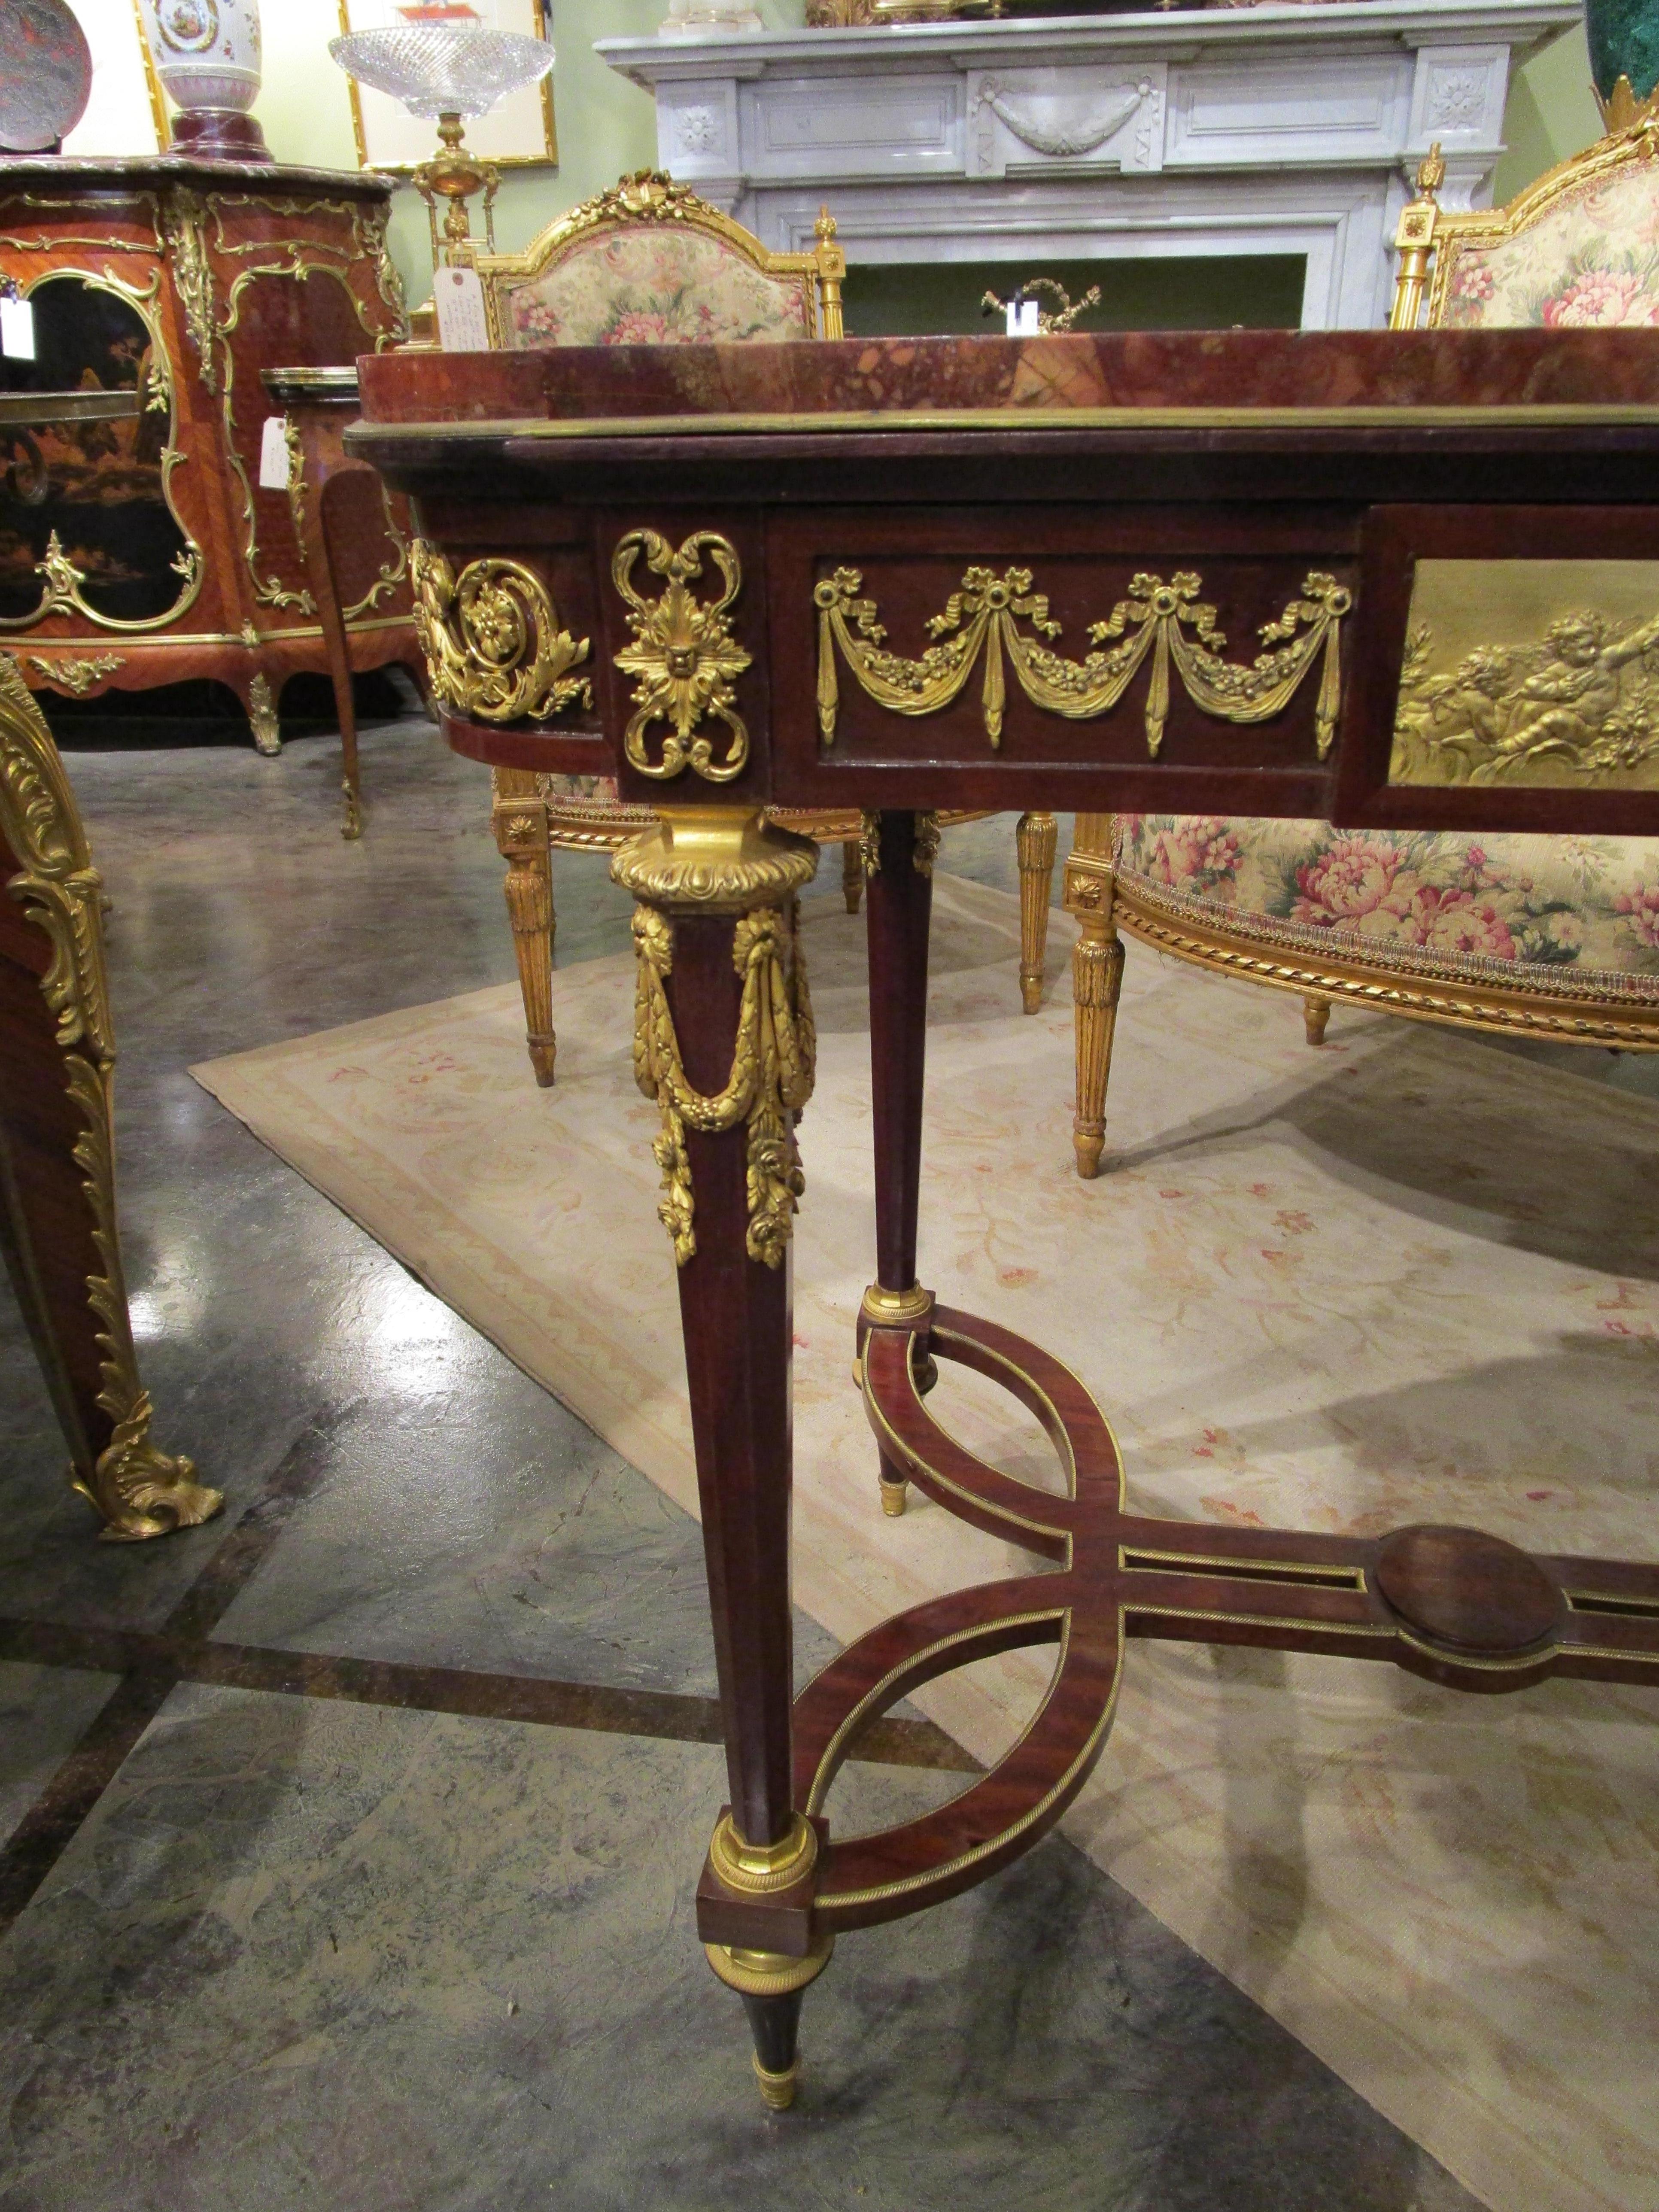 Gilt A fine 19th c French Louis XVI mahogany and gilt bronze mounted centertable